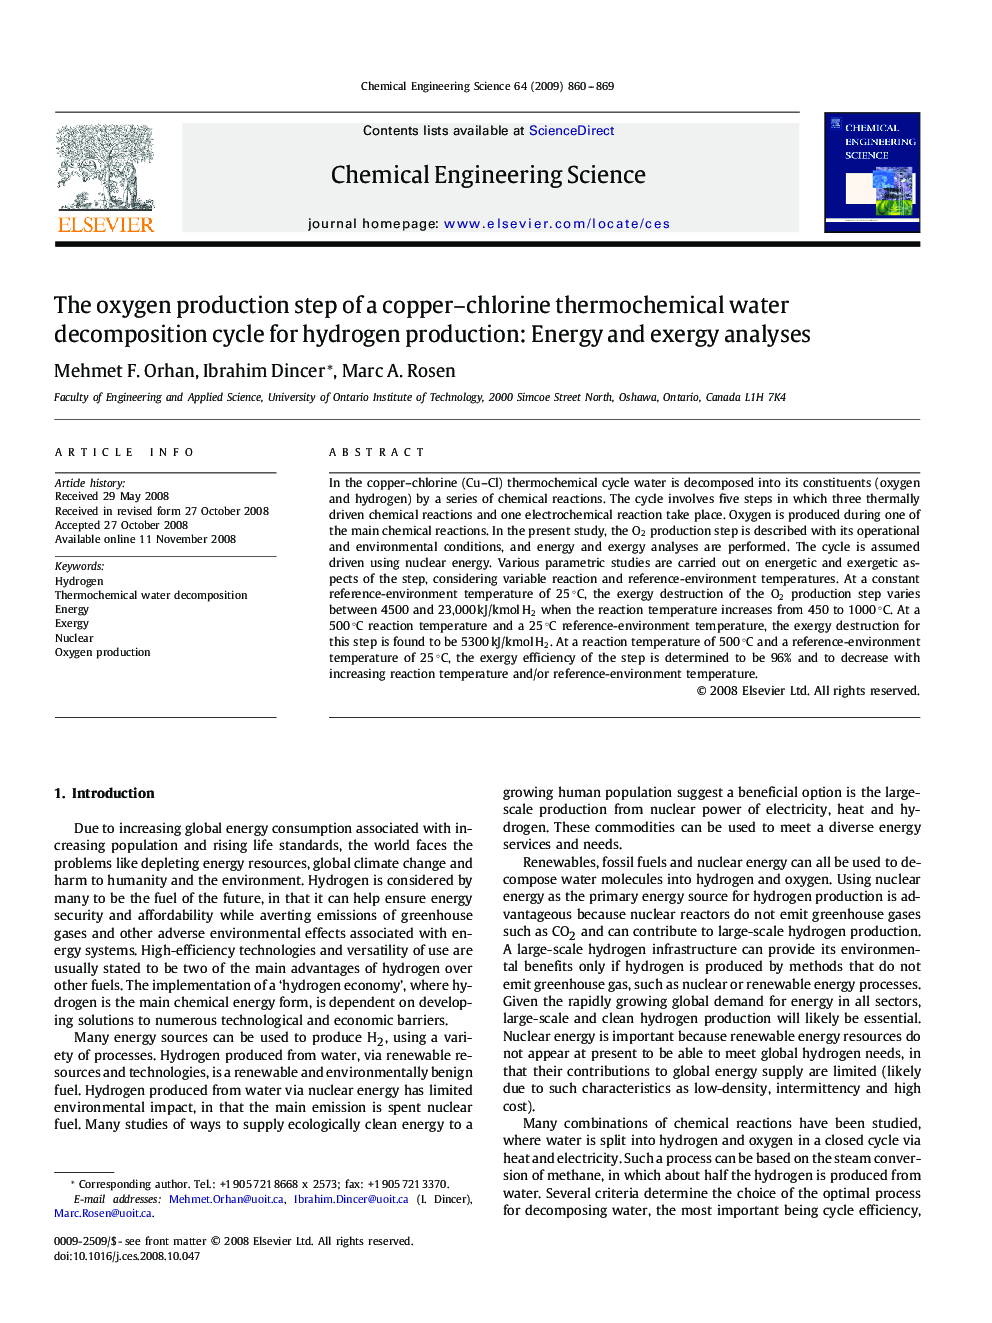 The oxygen production step of a copper–chlorine thermochemical water decomposition cycle for hydrogen production: Energy and exergy analyses